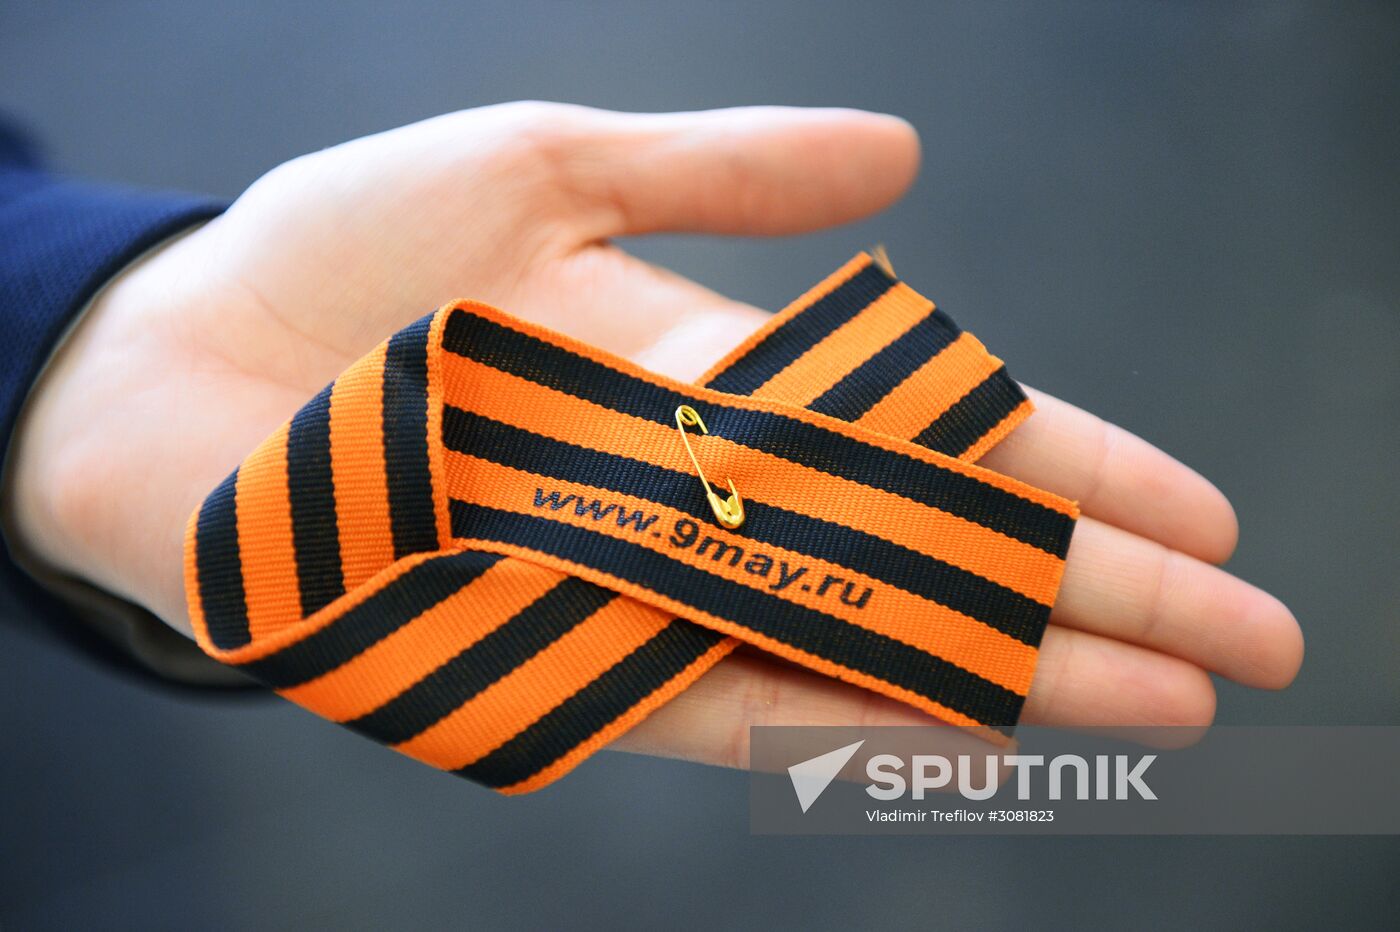 St. George Ribbon campaign starts in Moscow